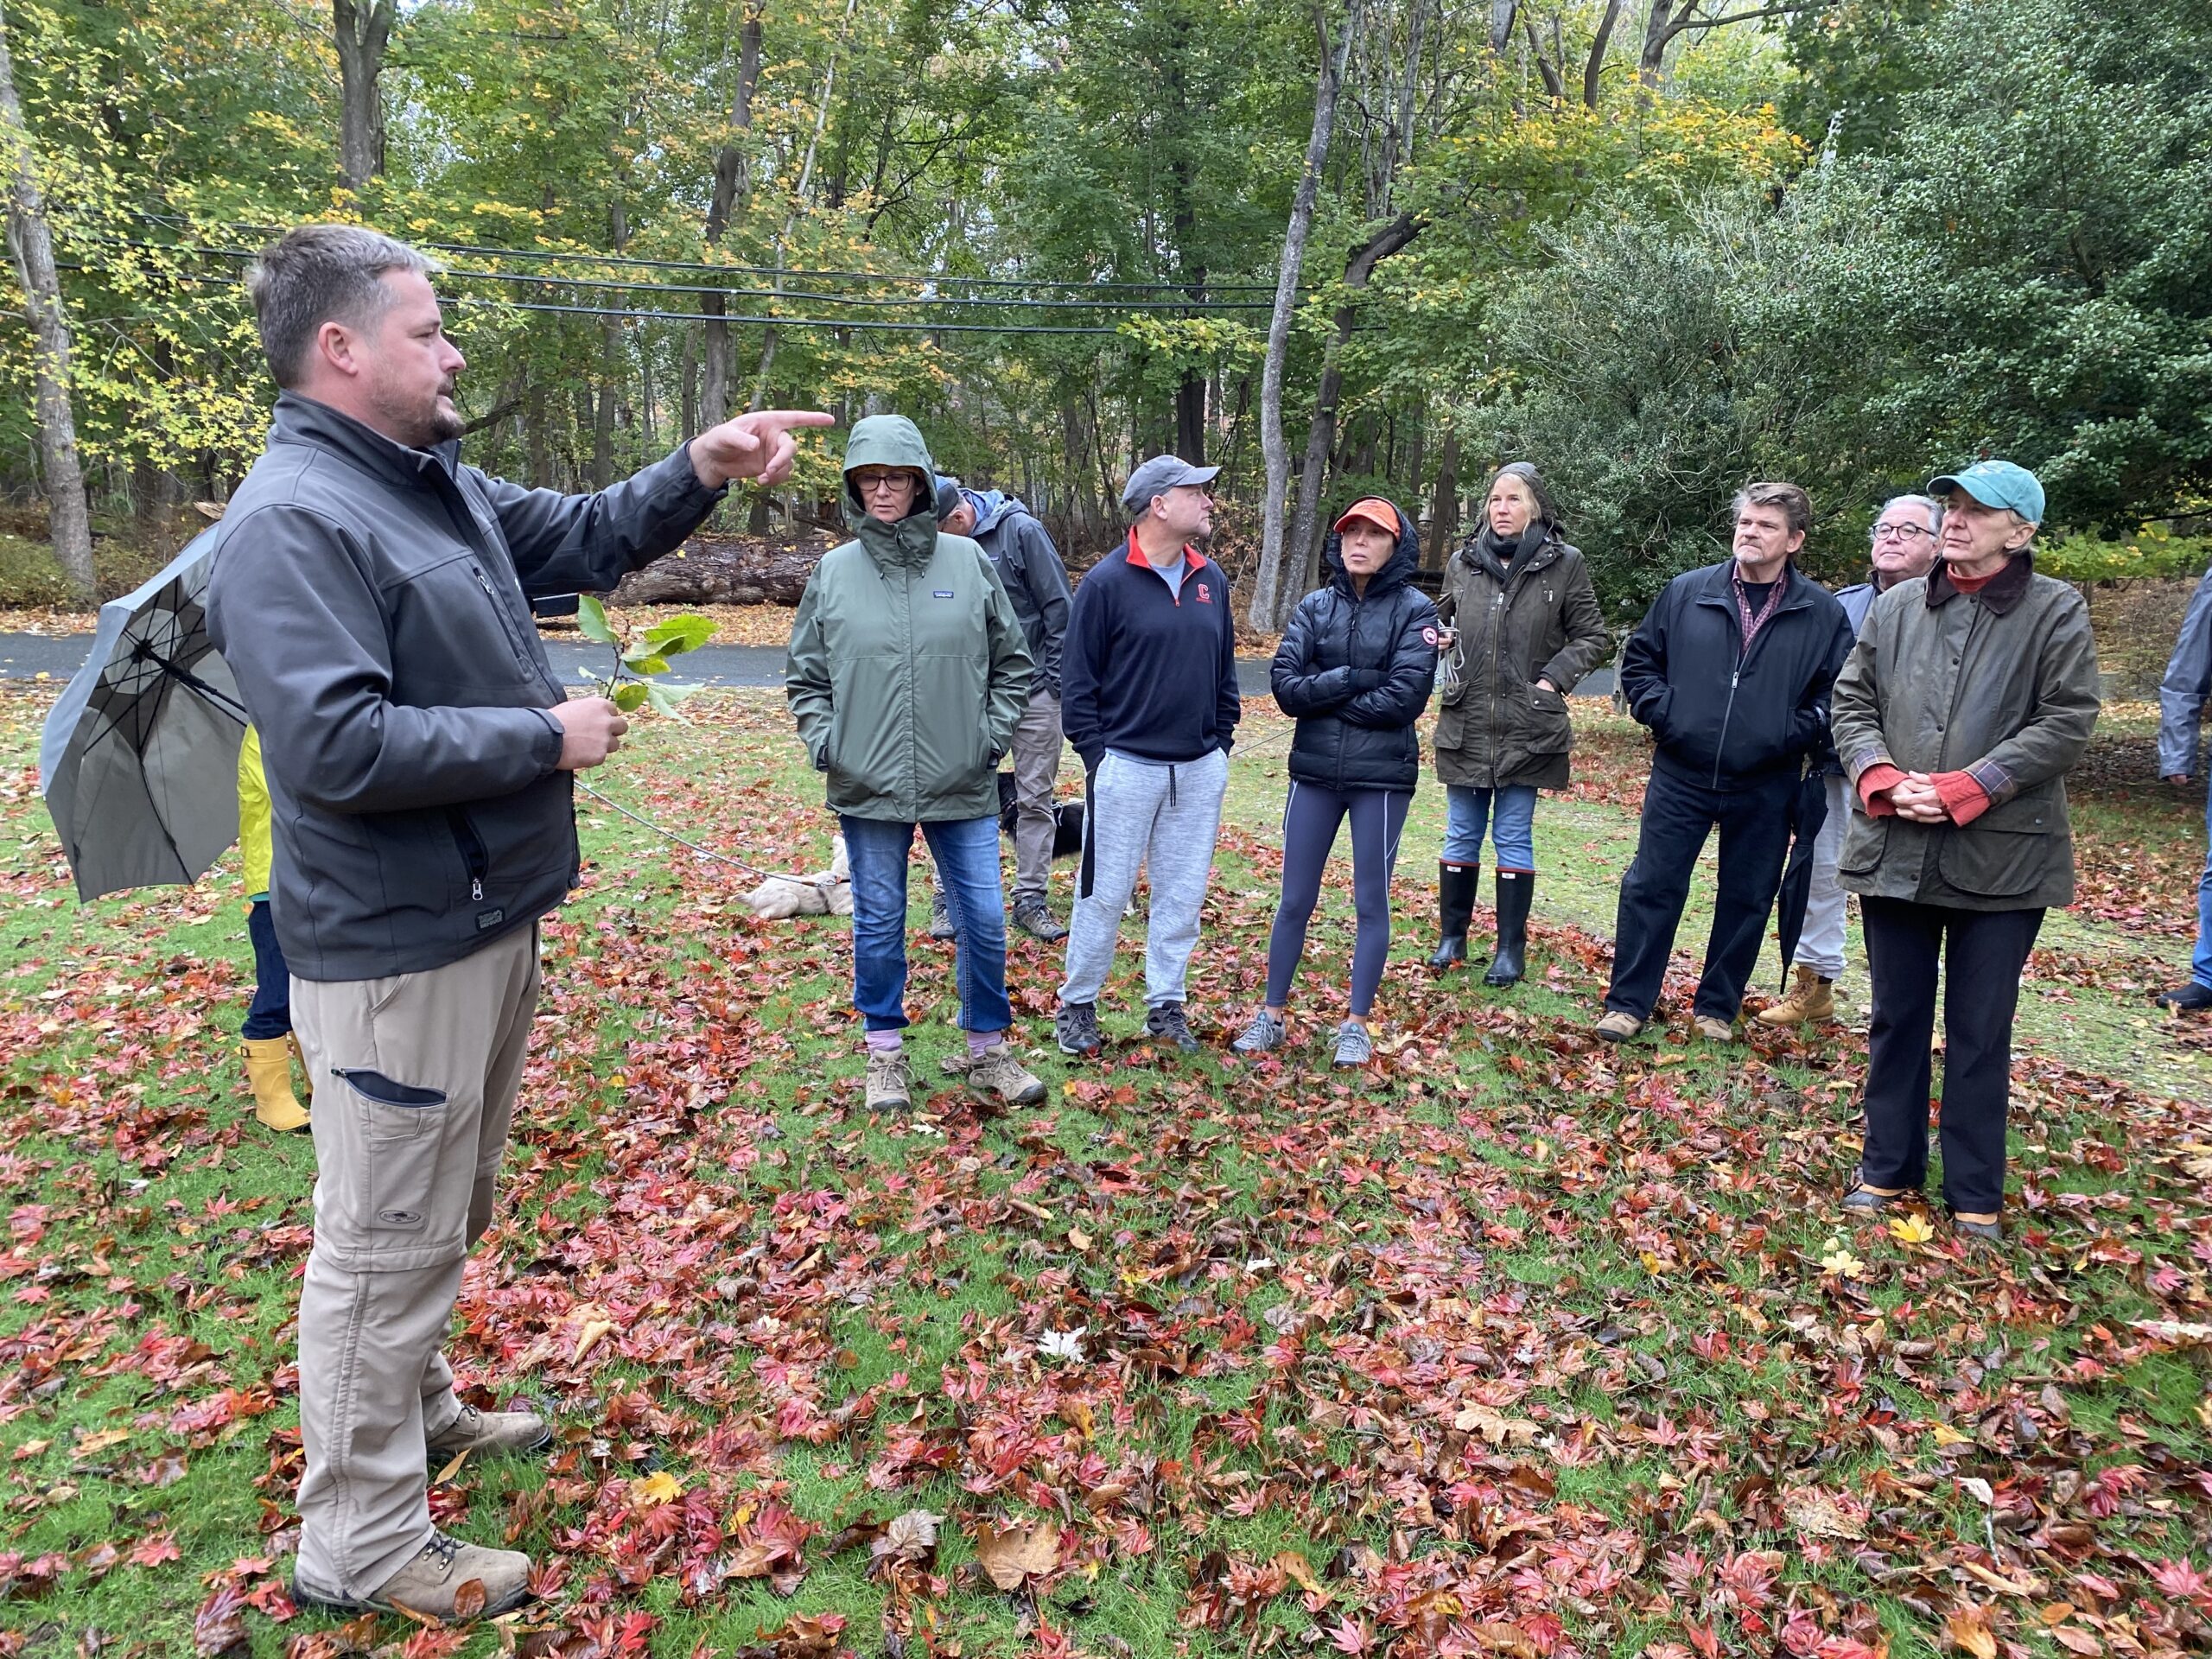 A group of about 25 North Haven residents went on a tree tour of the Lovelady Powell park on a cool, drizzly Sunday led by Jackson Dodds (left), the arborist who with landscaper Sam Panton has donated his services to the park project. The walk was organized by the North Haven Parks and Trails Association. PETER BOODY PHOTO